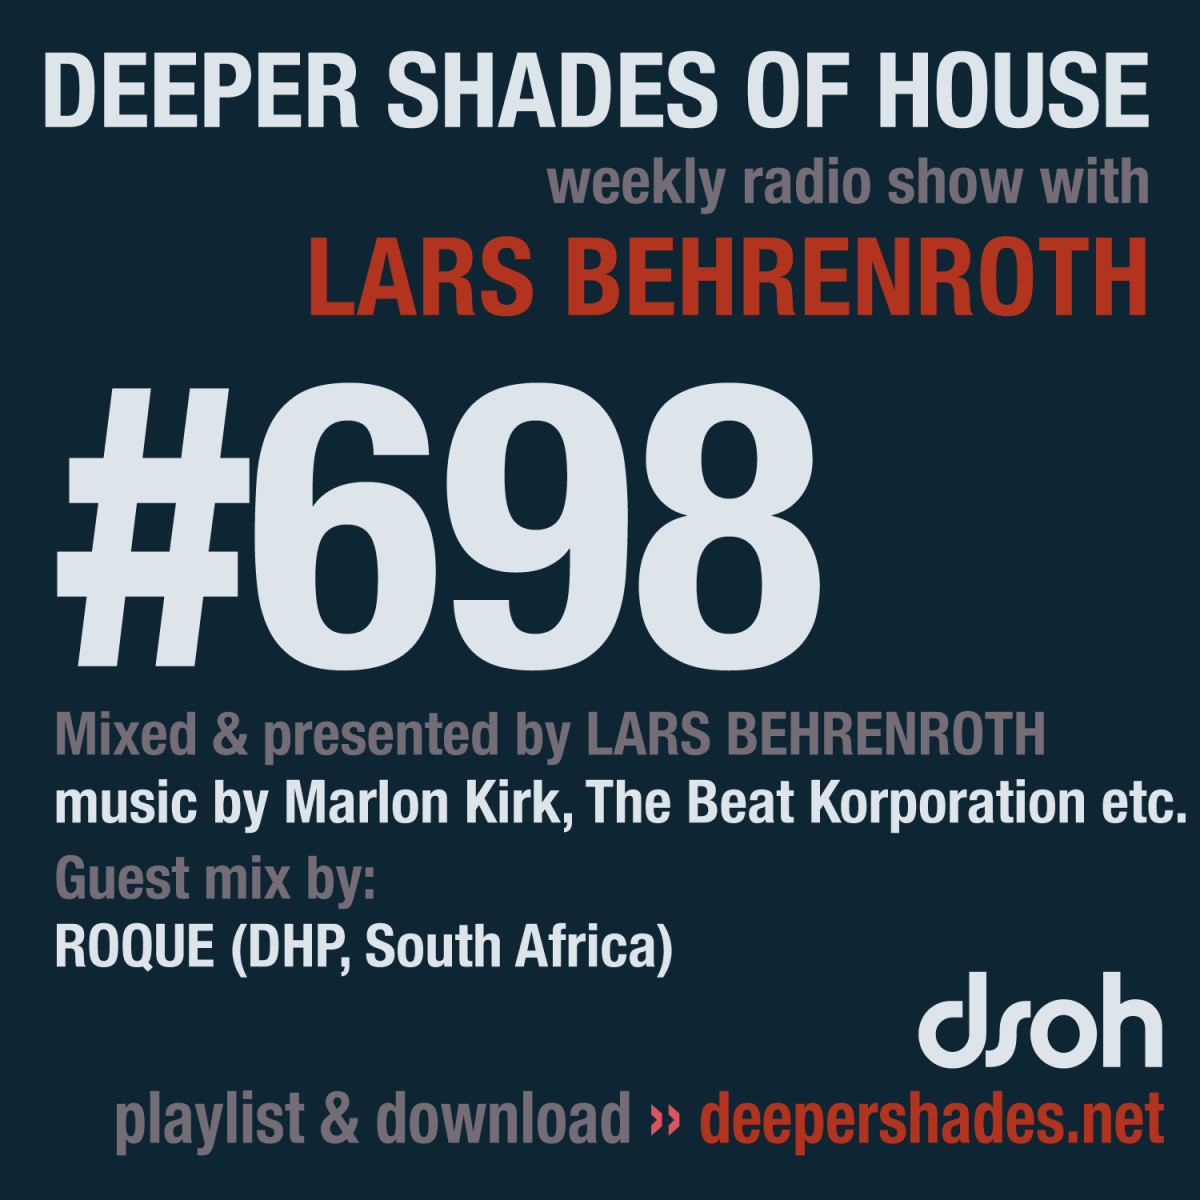 #nowplaying on radio.deepershades.net : Lars Behrenroth w/ exclusive guest mix by ROQUE (Deephousepolice, South Africa) - DSOH #698 Deeper Shades Of House #deephouse #livestream #dsoh #housemusic